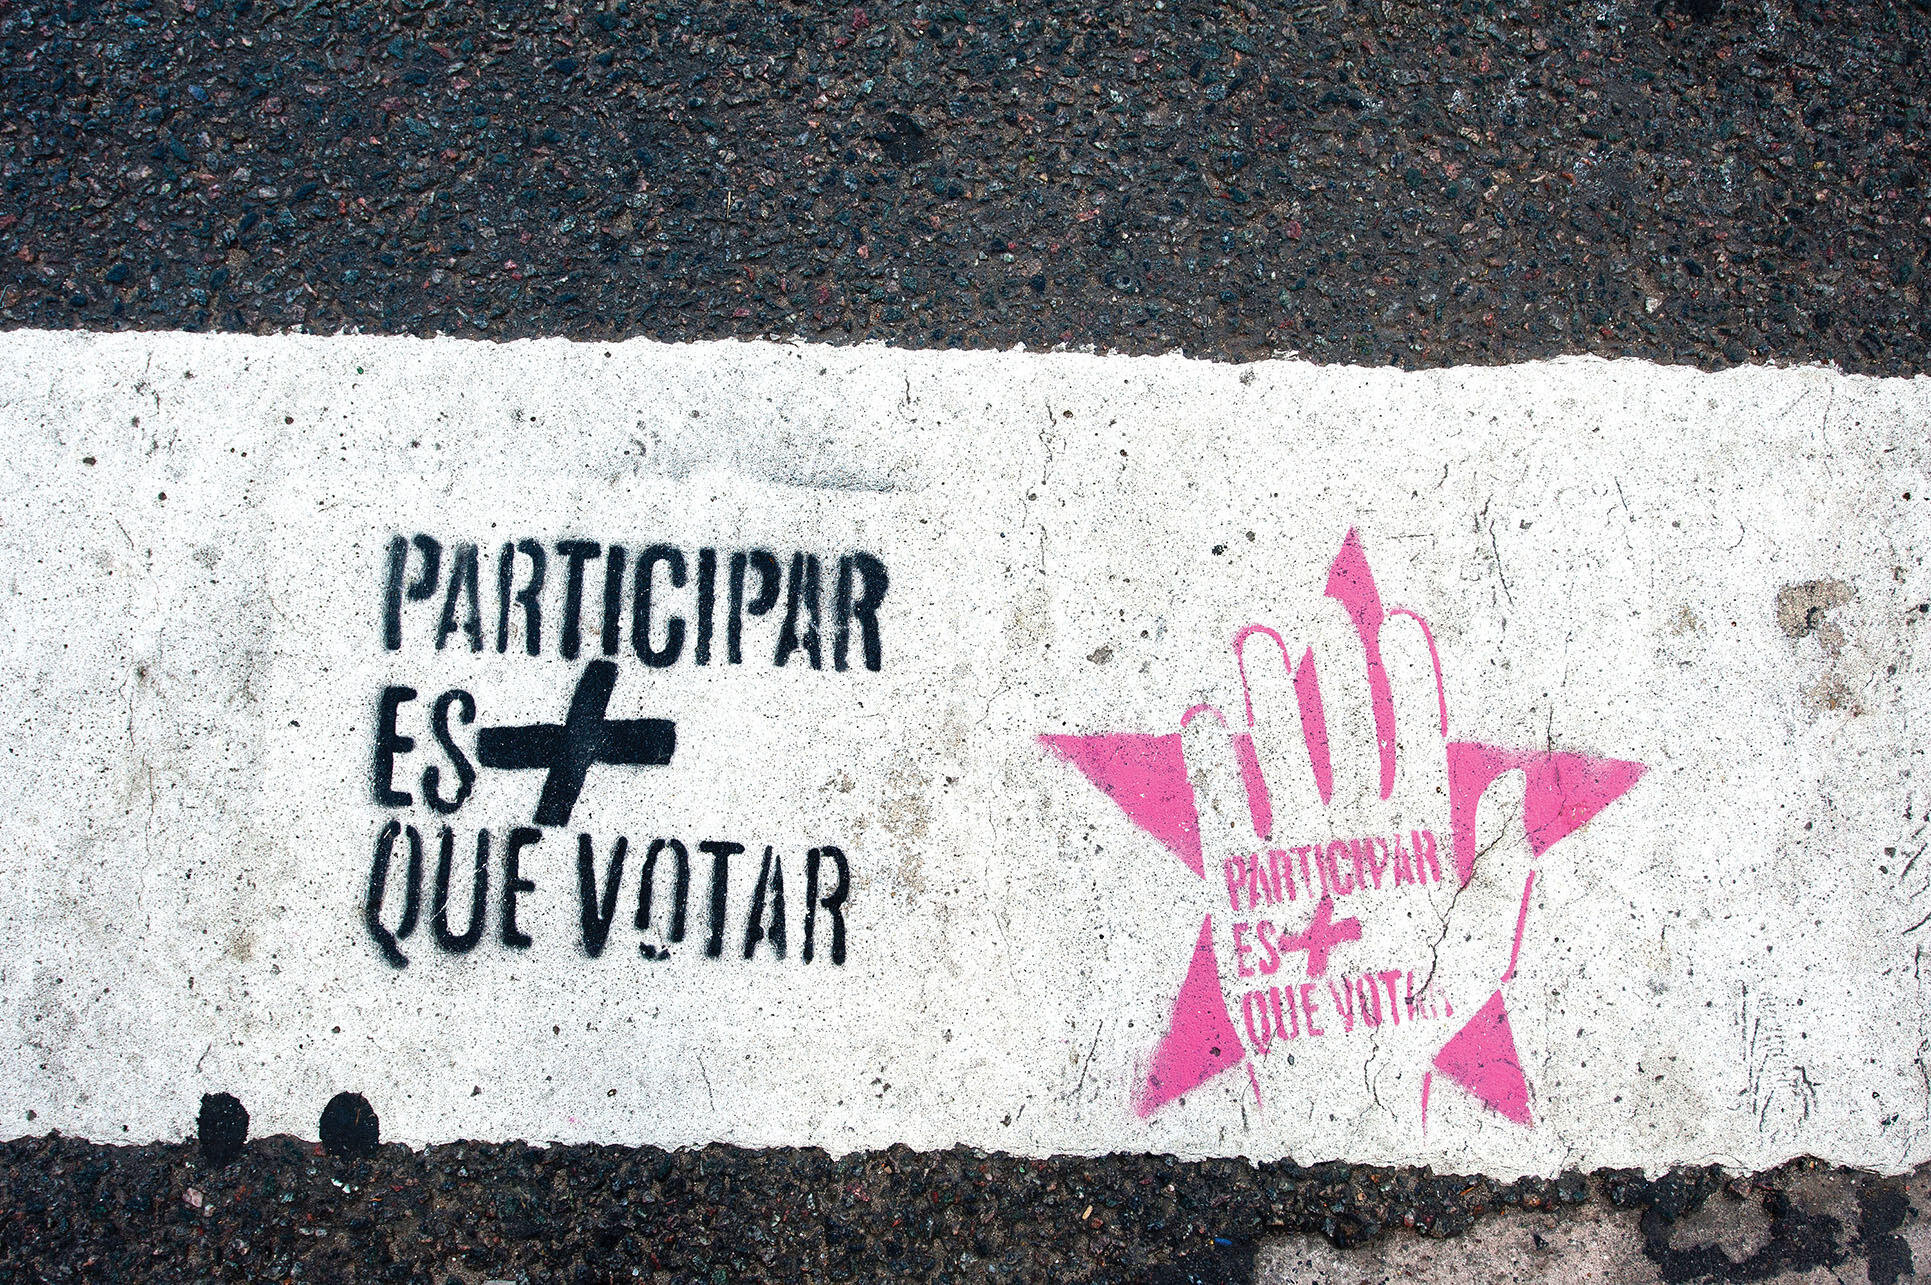 Graffiti painted on a sidewalk reads "Participation is more than voting." (Photo by Caitlin Margaret Kelly.)